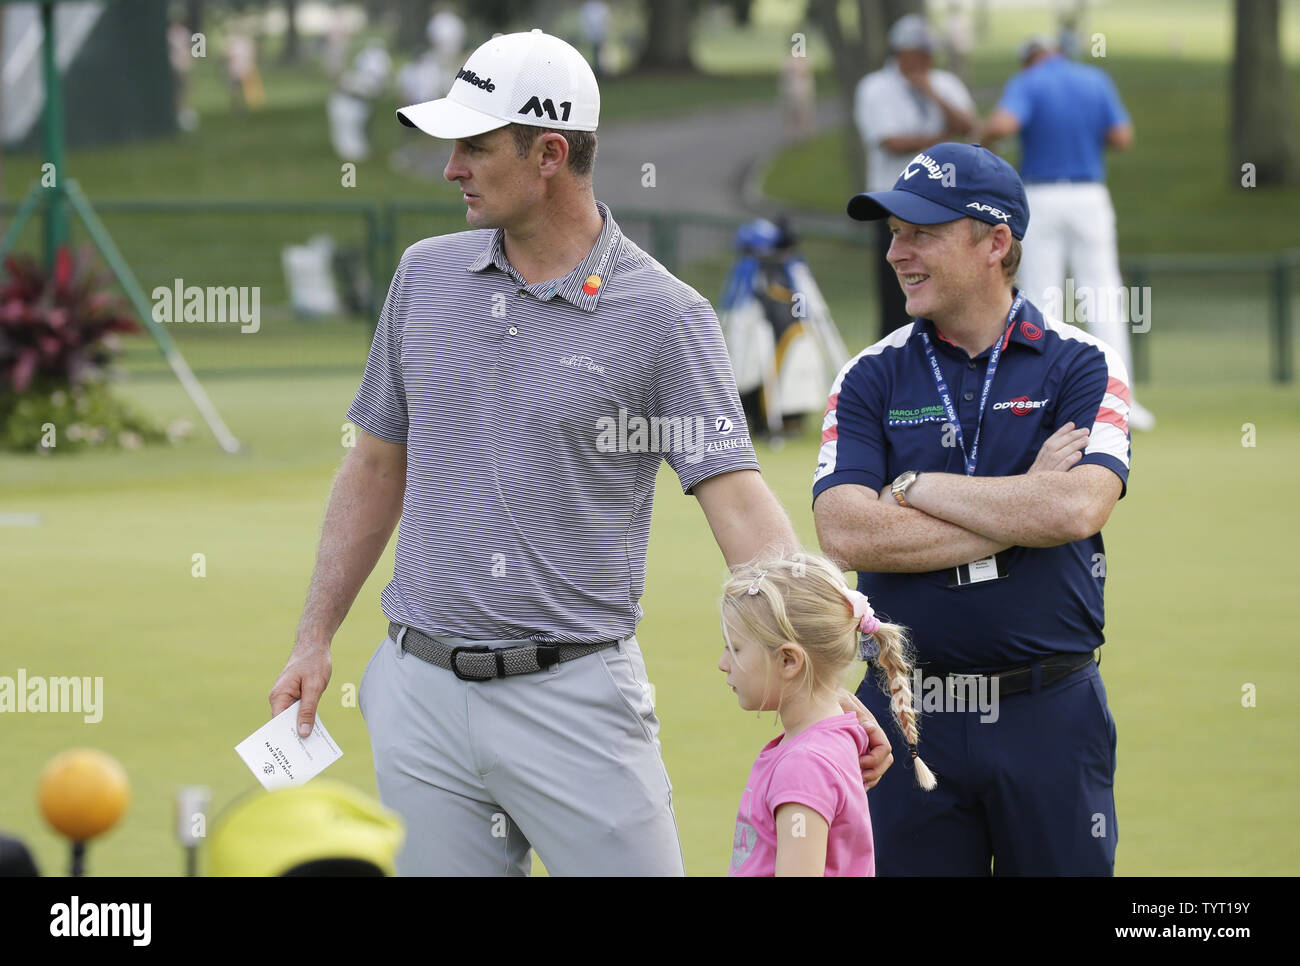 Justin Rose of England stands on the practice green wth daughter Charlotte Rose at a practice round before The Northern Trust golf championship at the Glen Oaks Club in Old Westbury, New York on August 22, 2017. Glen Oaks Club is hosting THE NORTHERN TRUST for the first time.     Photo by John Angelillo/UPI Stock Photo